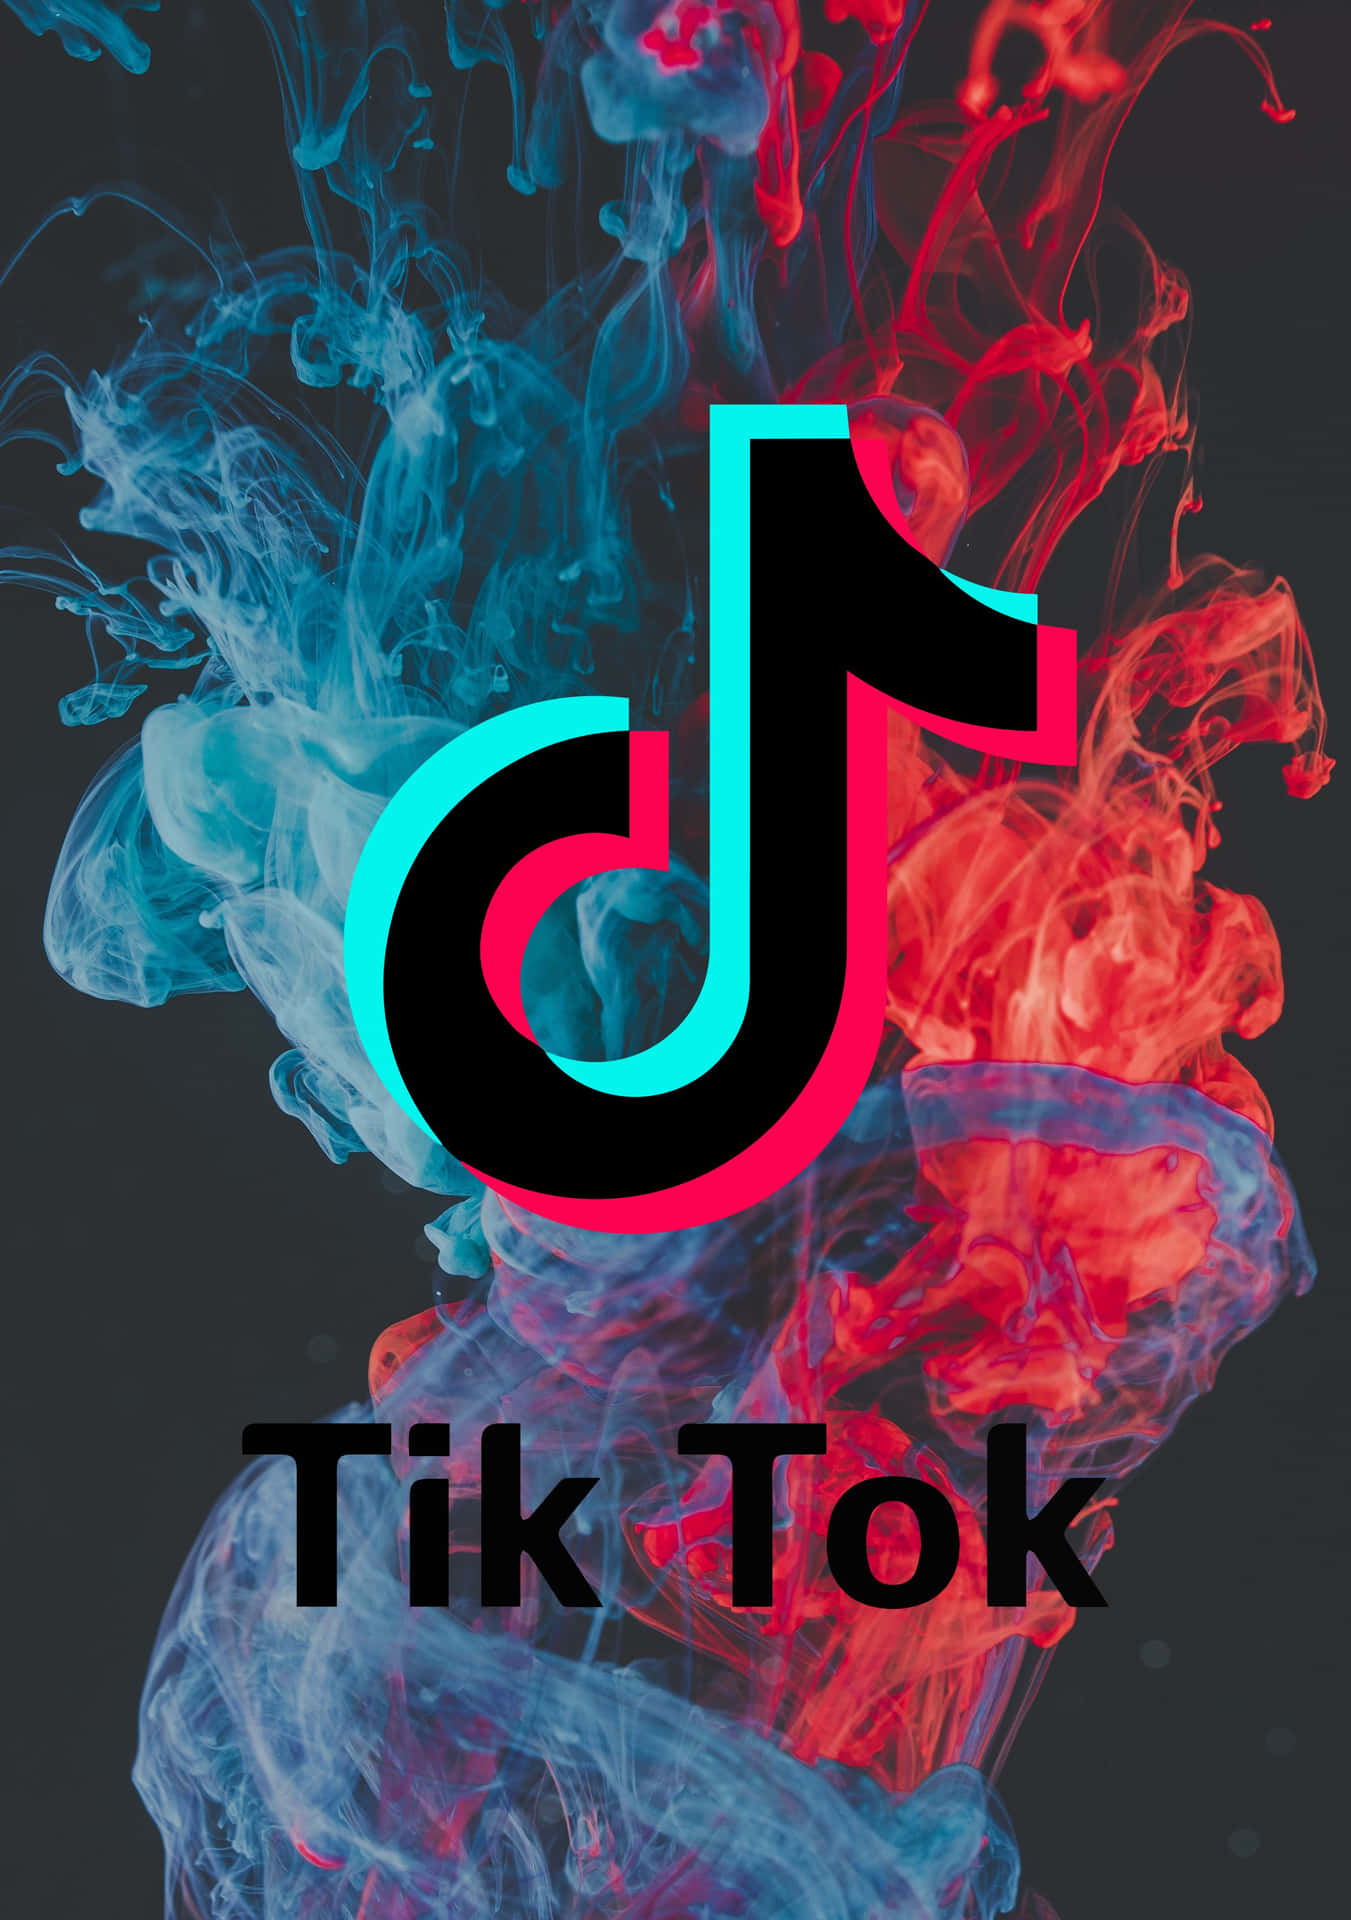 Download Keeping Up With The TikTok Craze | Wallpapers.com